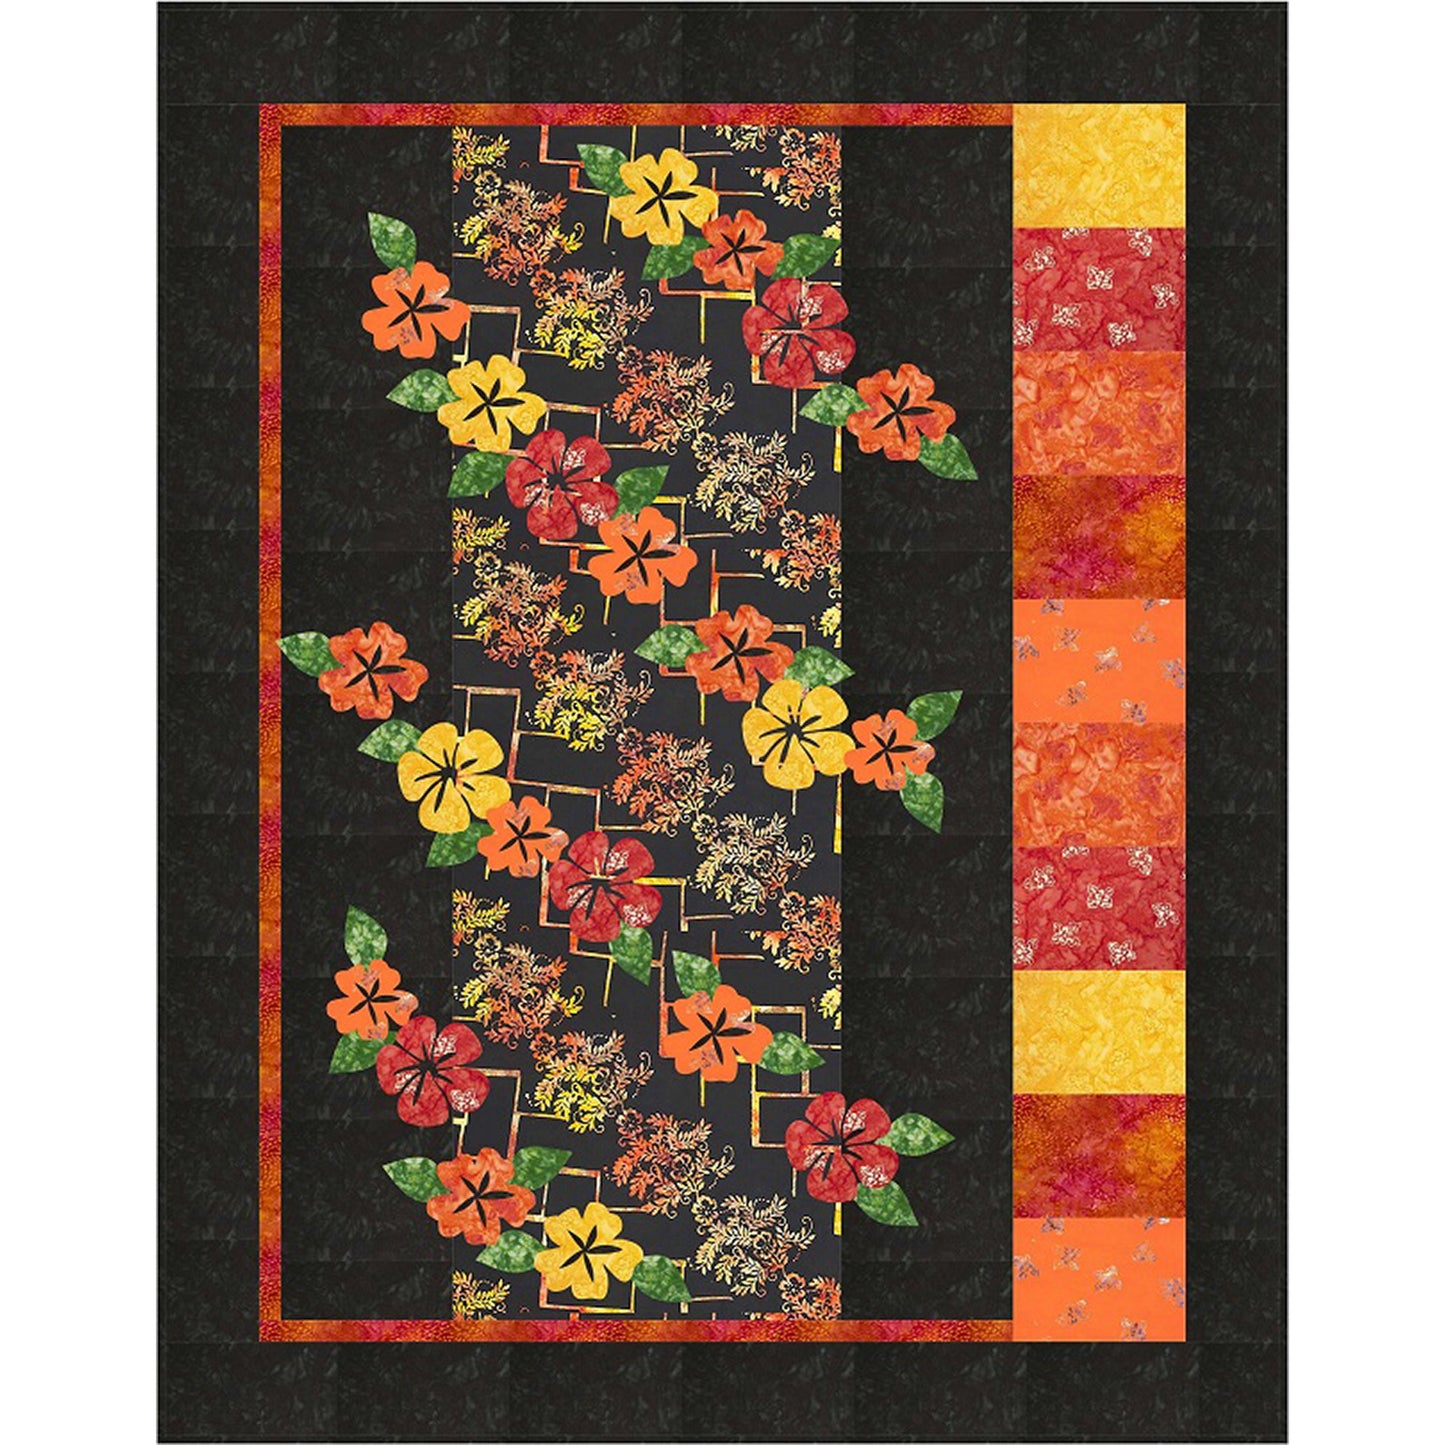 Floral quilt with appliqued flowers in yellows and orange over a lattice fabric with bright colored blocks to the right which all pop because of black background color.